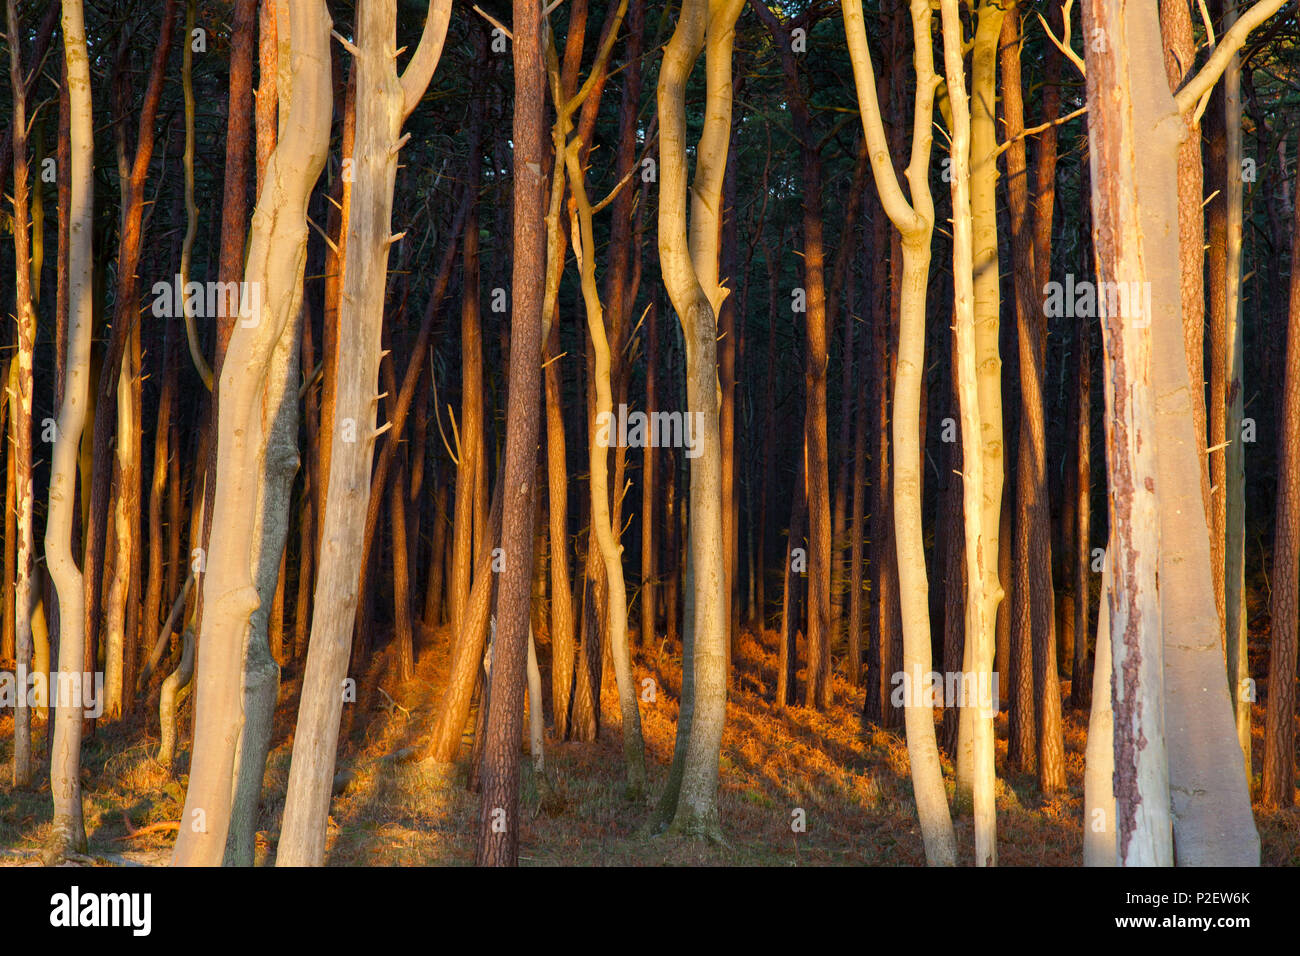 Sunset, Golden, Trees, Forest, Baltic Sea, Darss, Coast, National Park, Germany Stock Photo